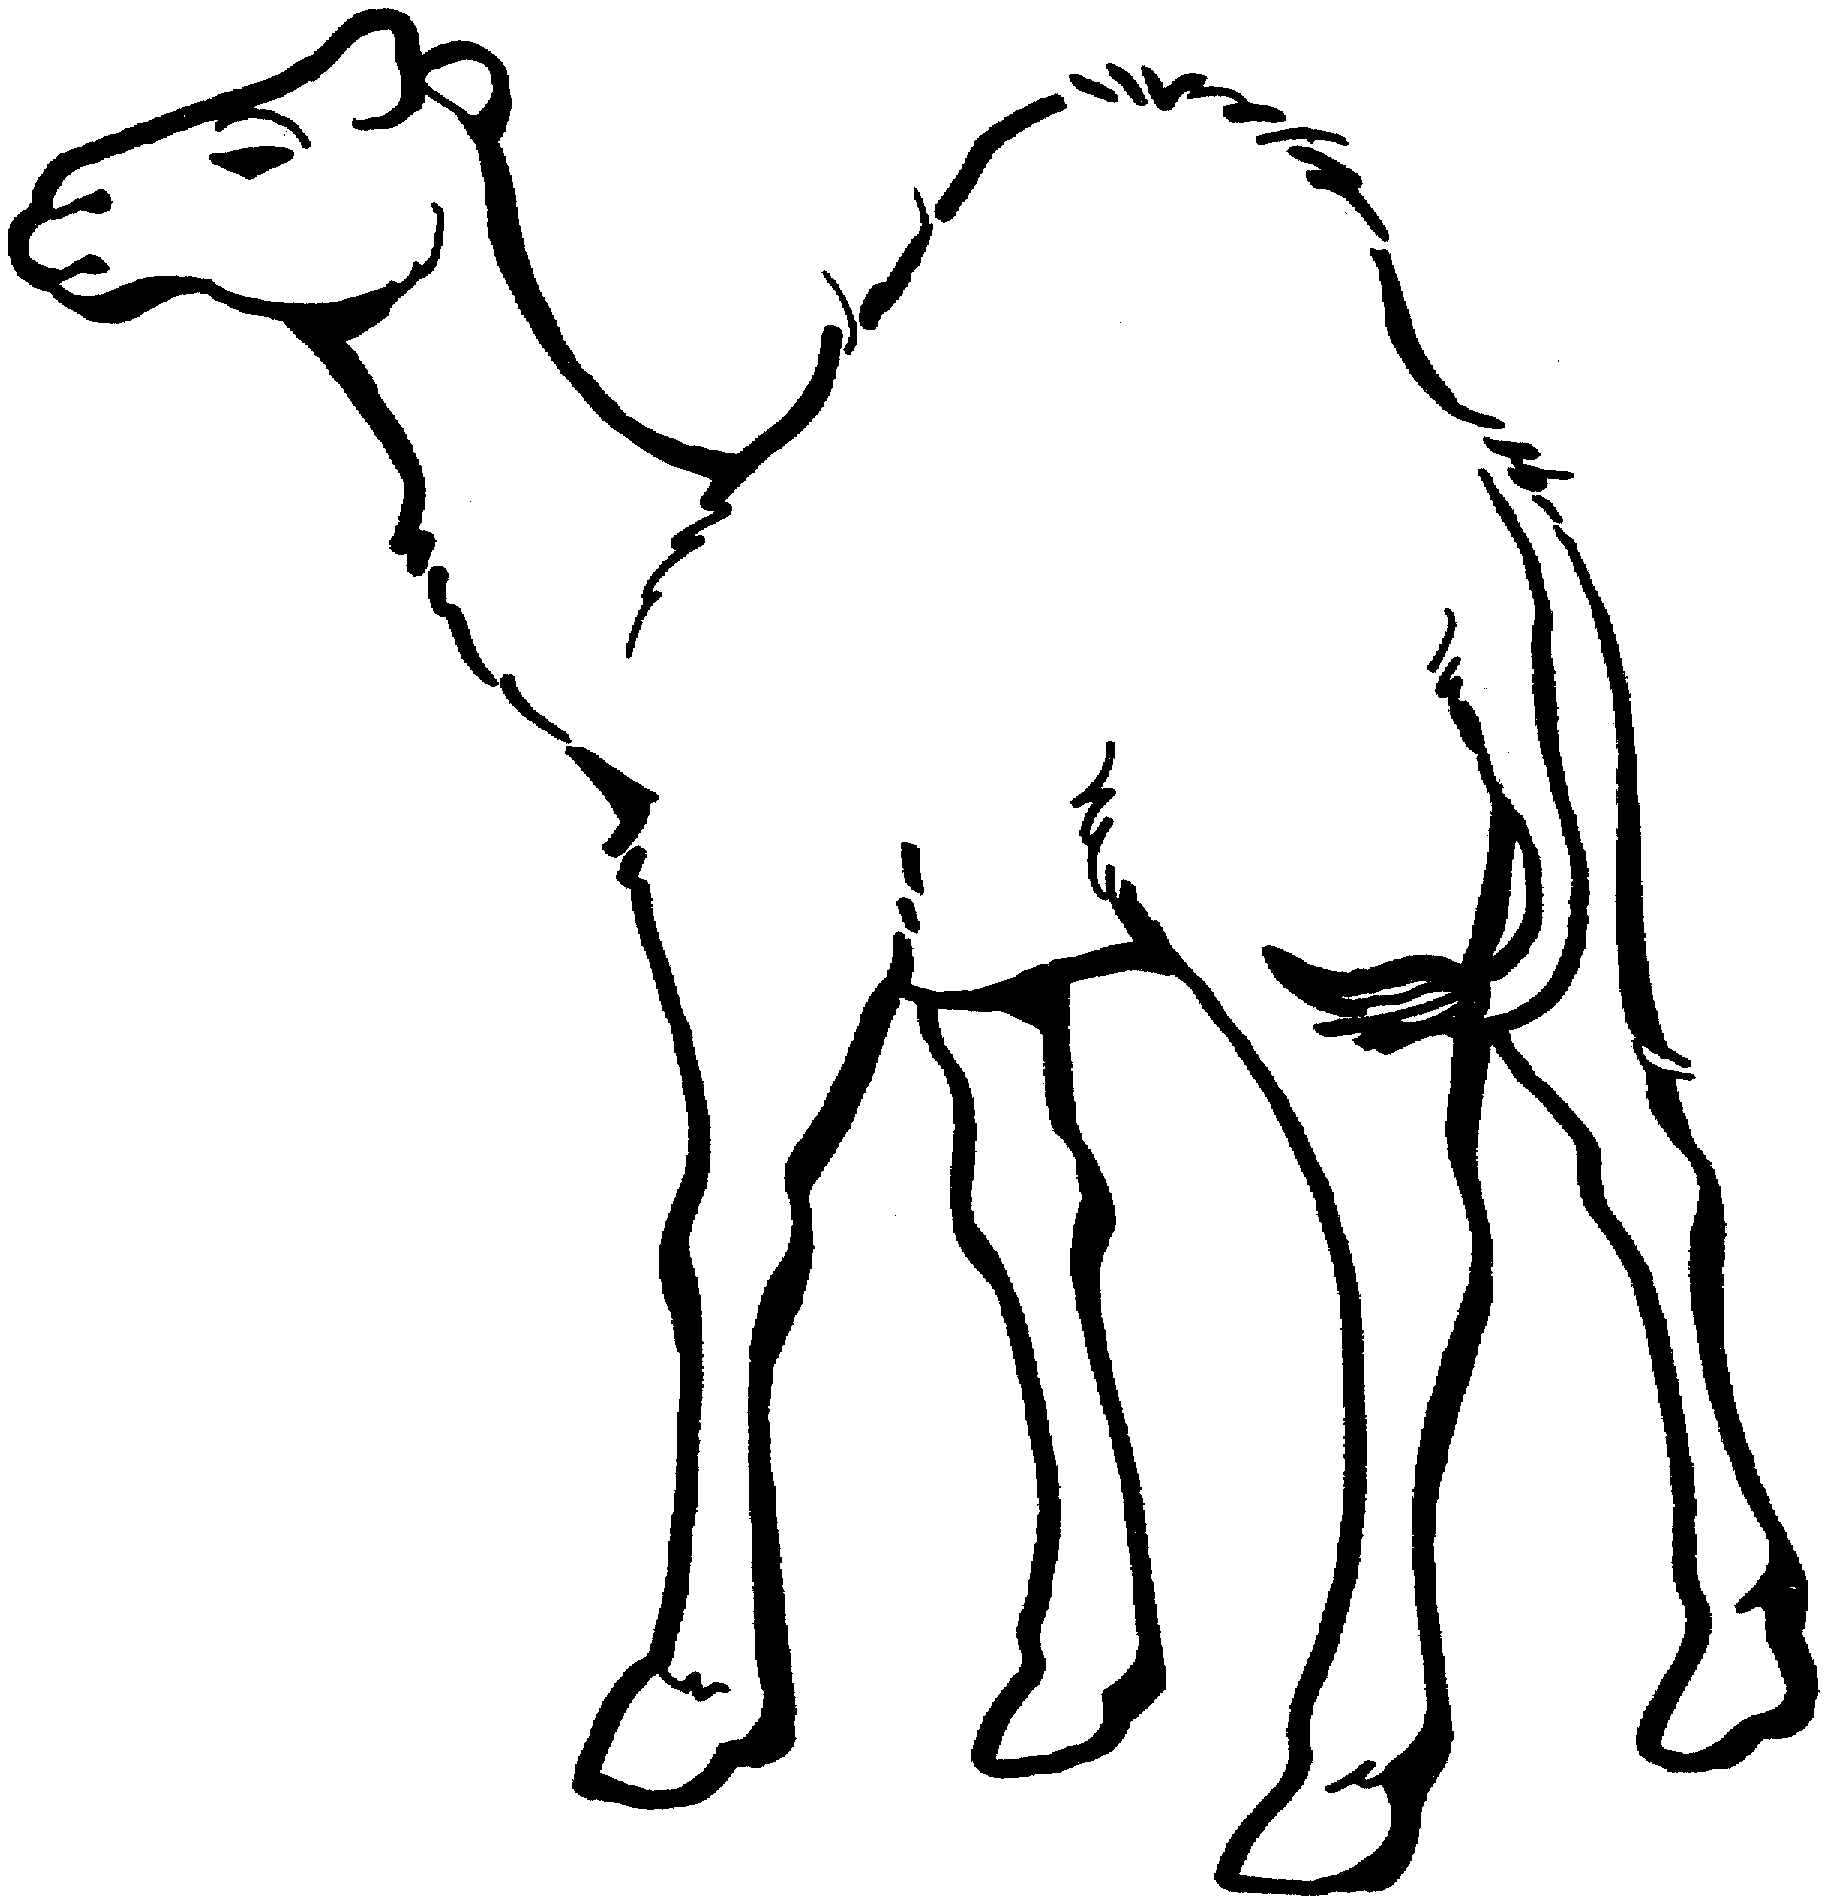 Camel clipart black and white free images 2